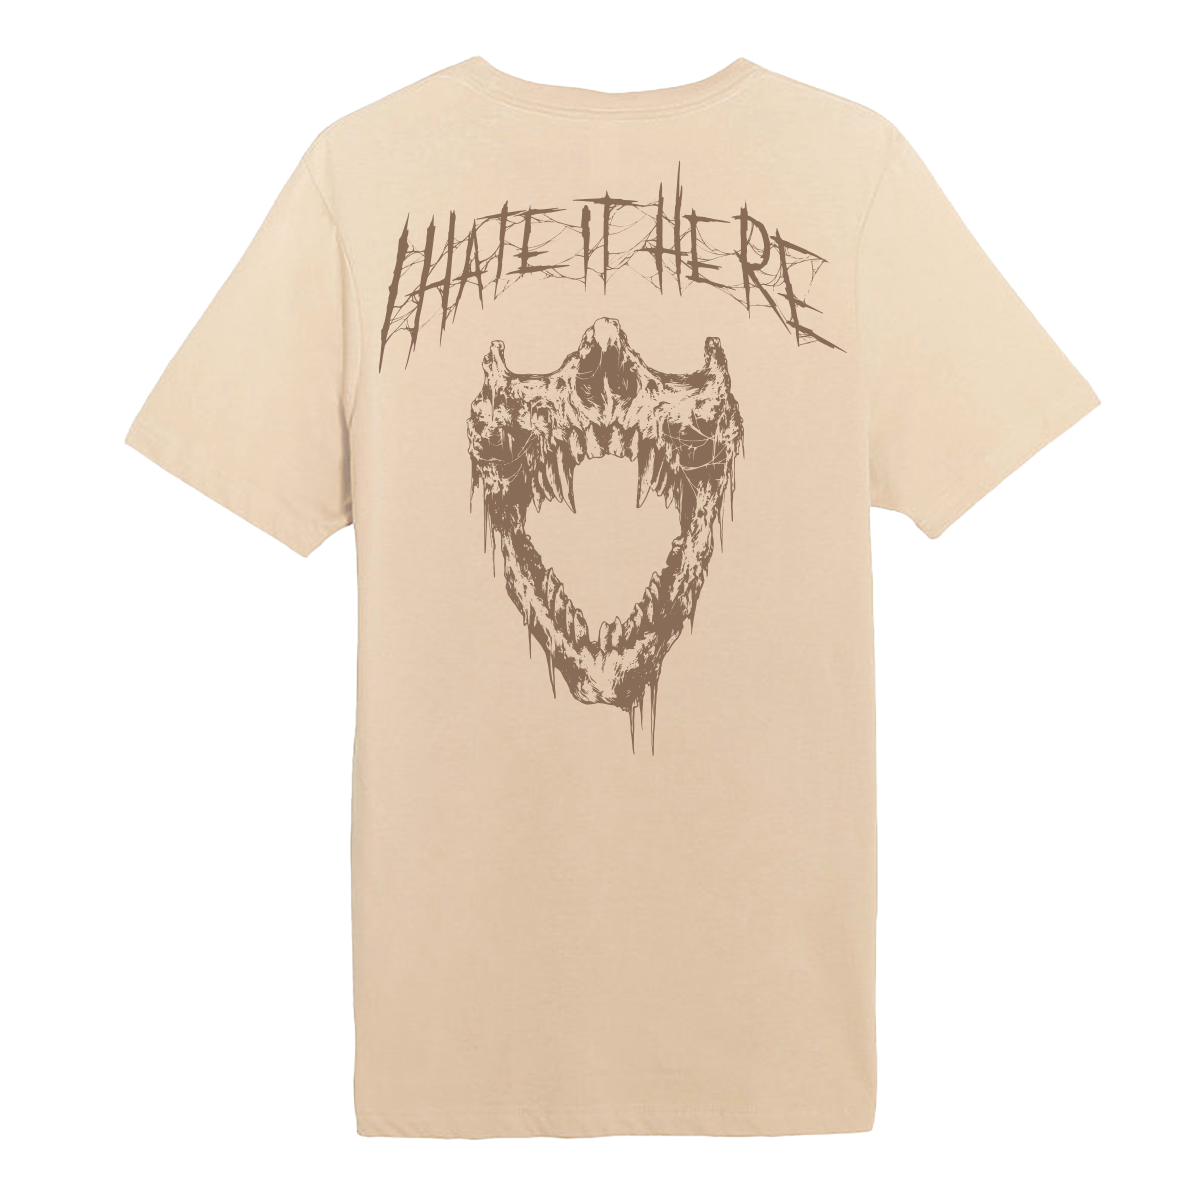 Hate it Here v2 Midweight Tee